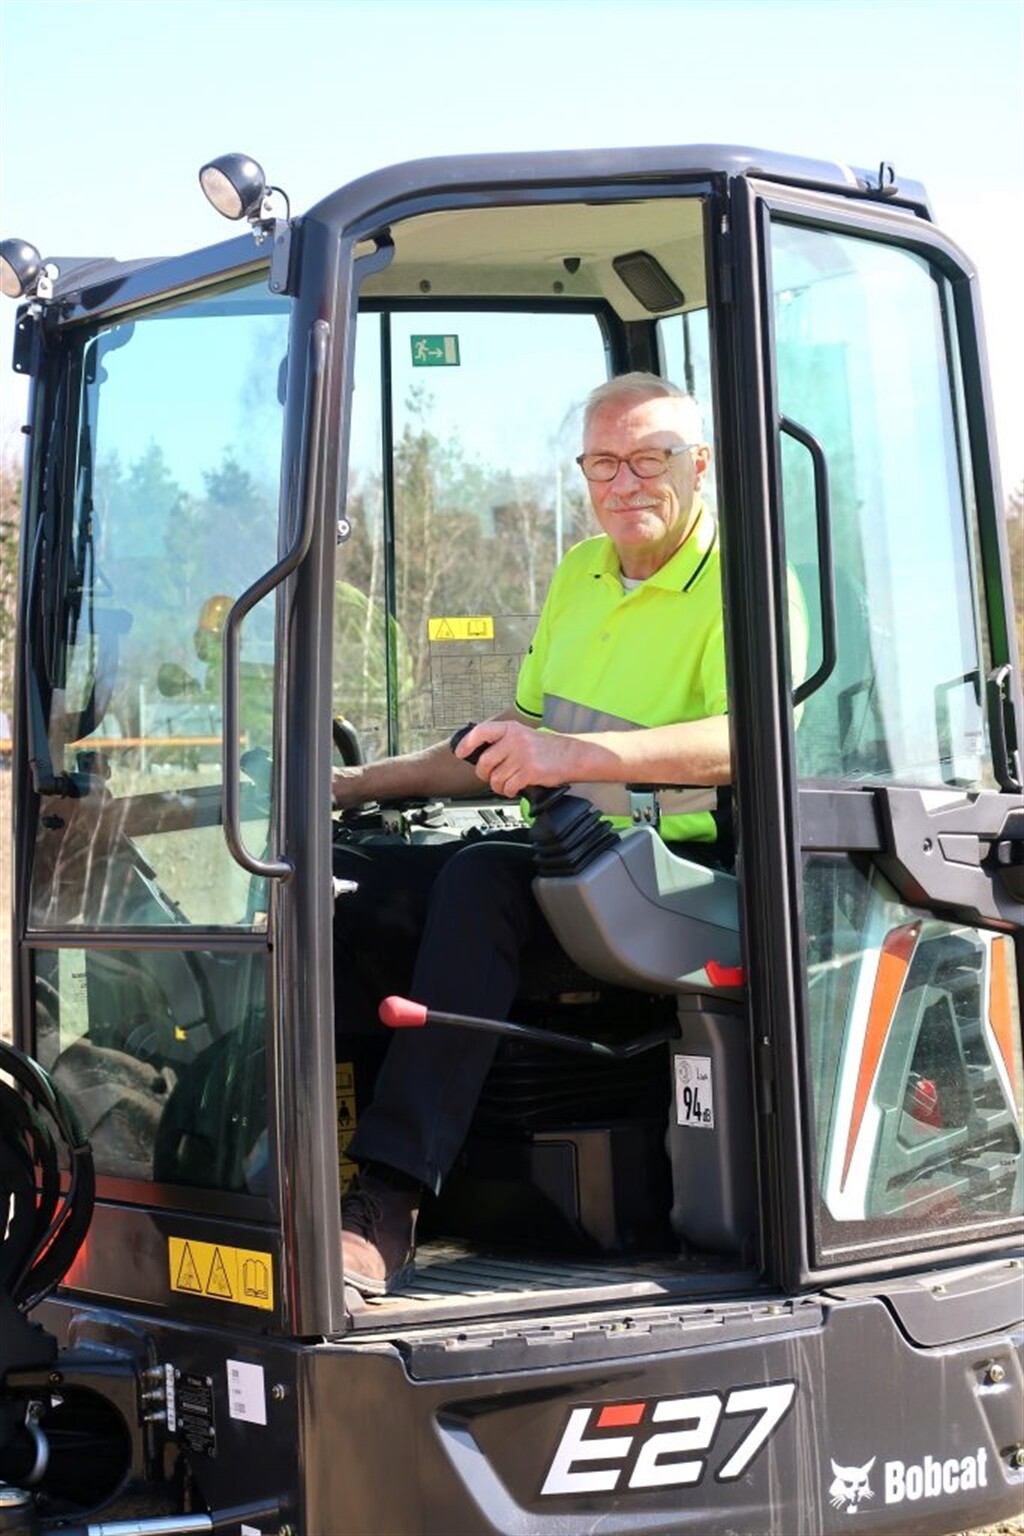 Bauma Working Hero - Robby Bosch - A True Legend with Over 40 Years of Bobcat Experience